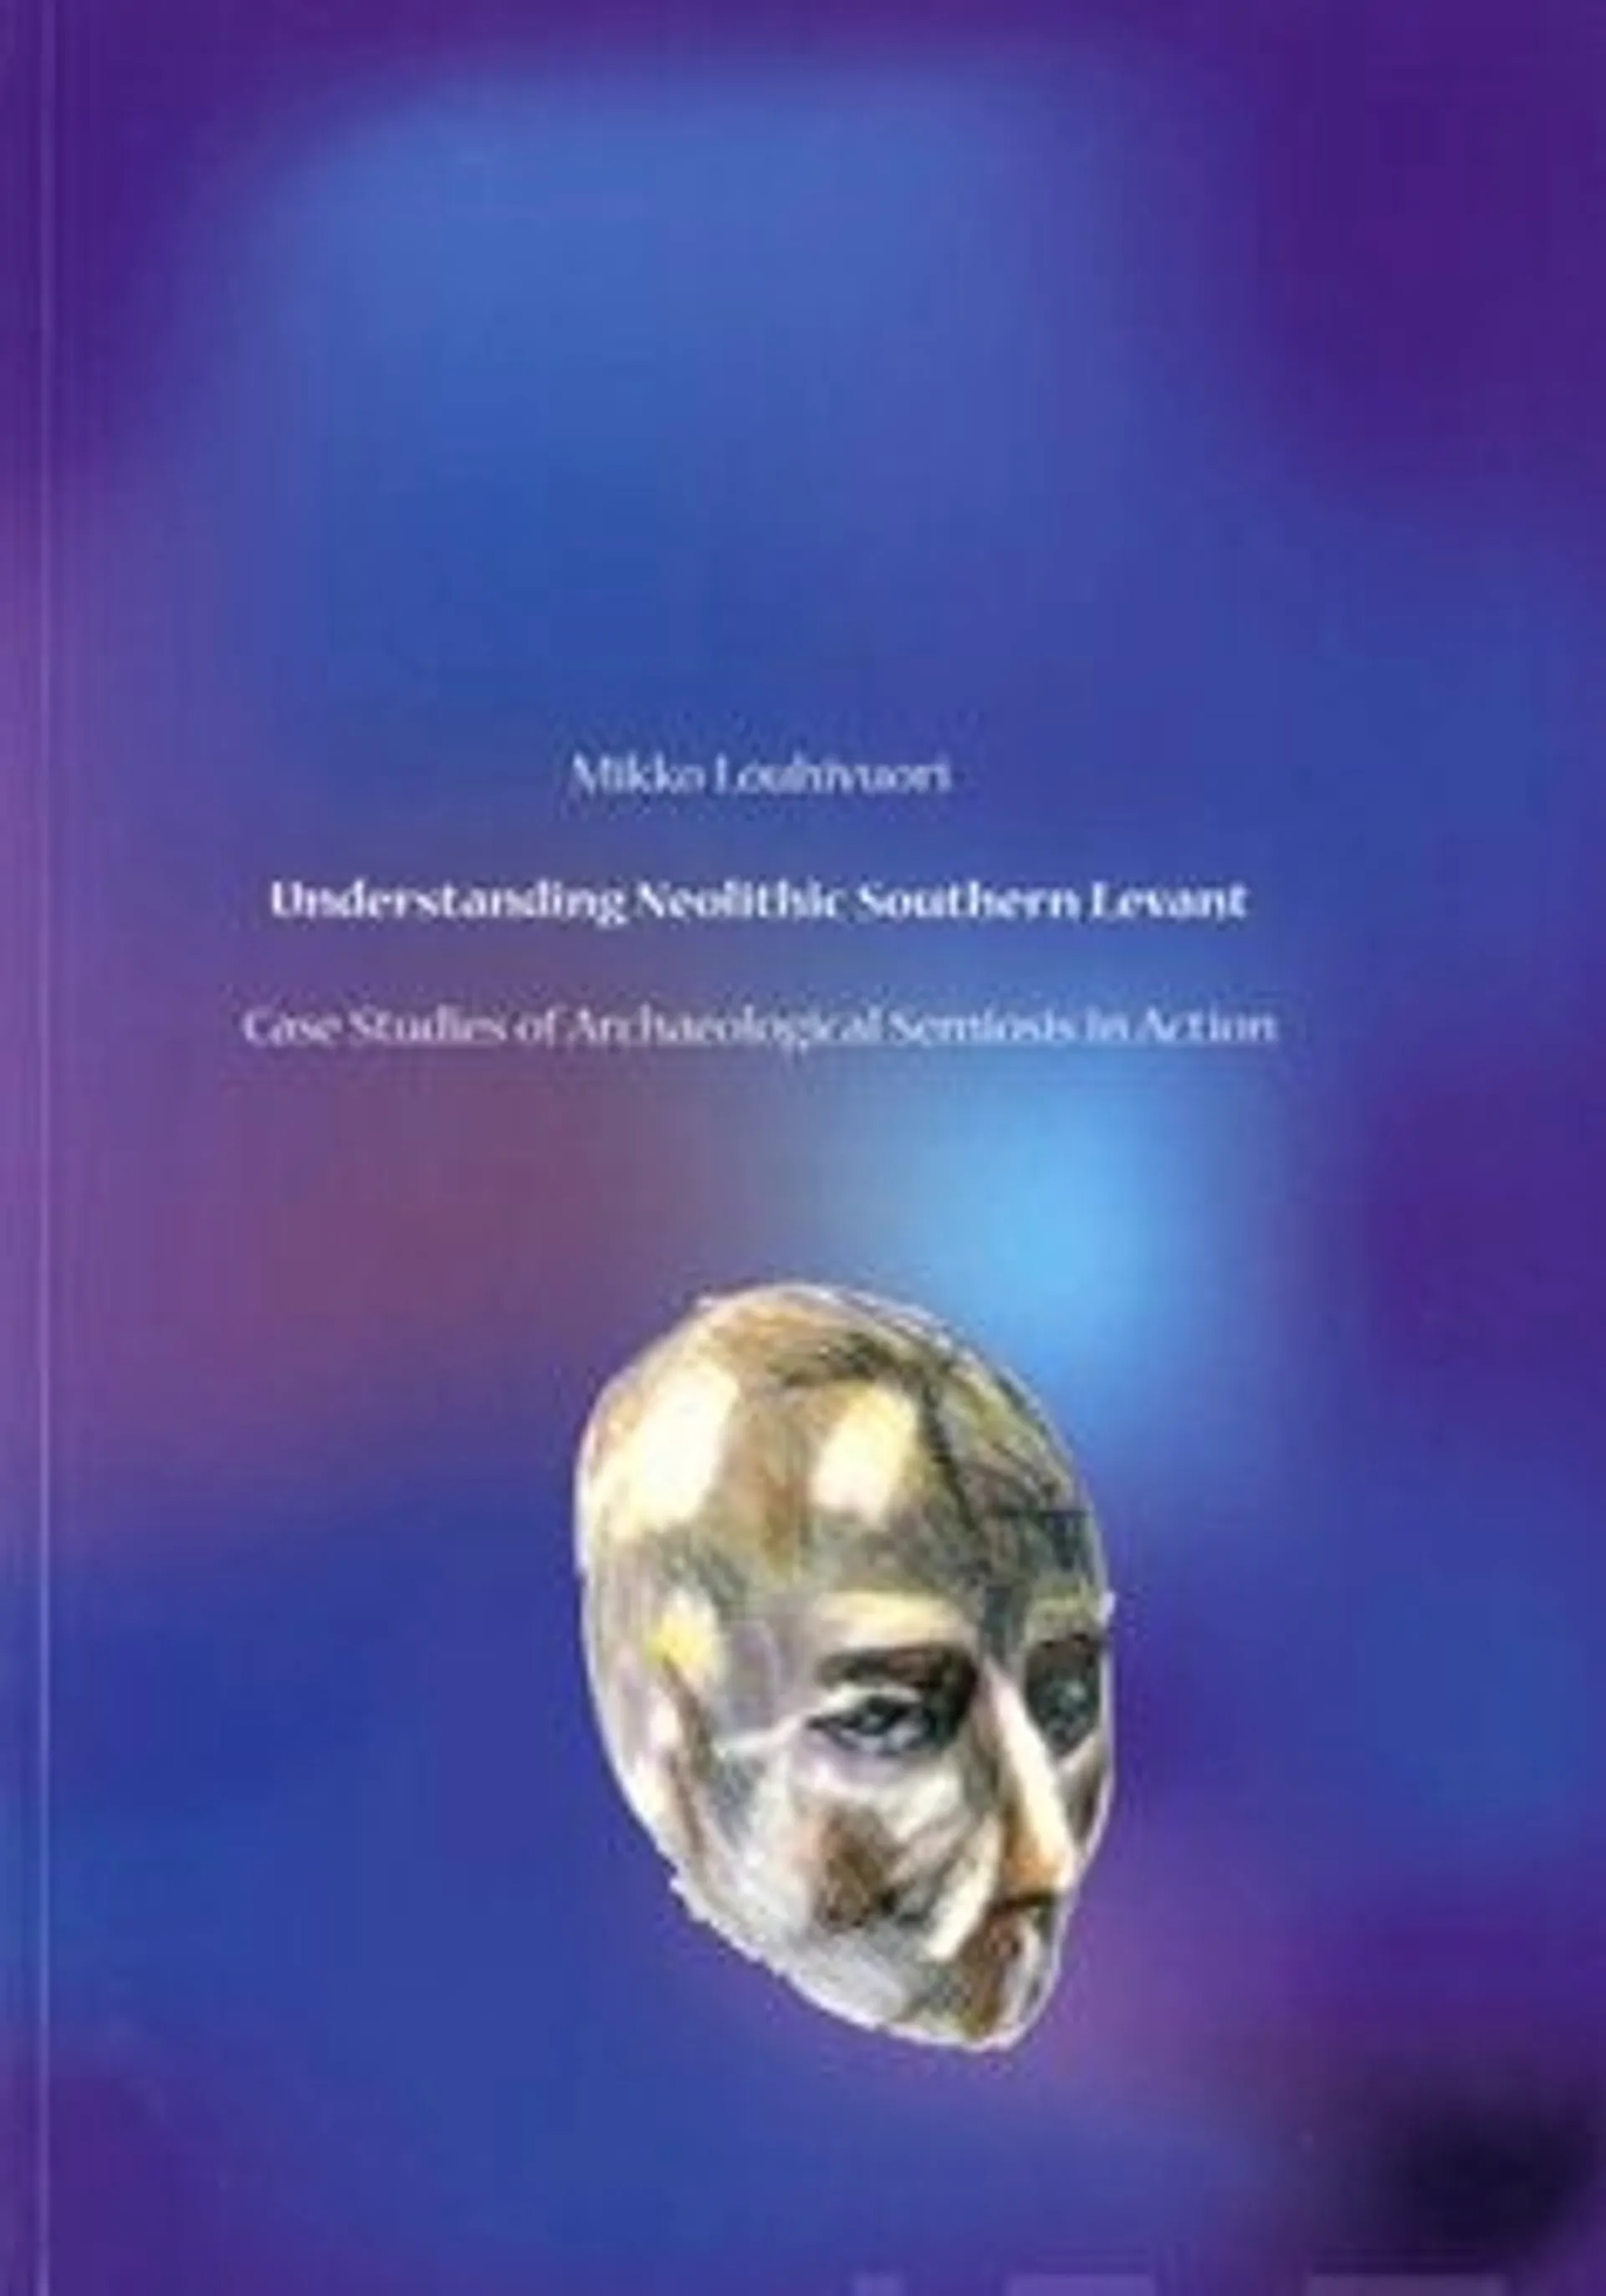 Louhivuori, Understanding Neolithic Southern Levant